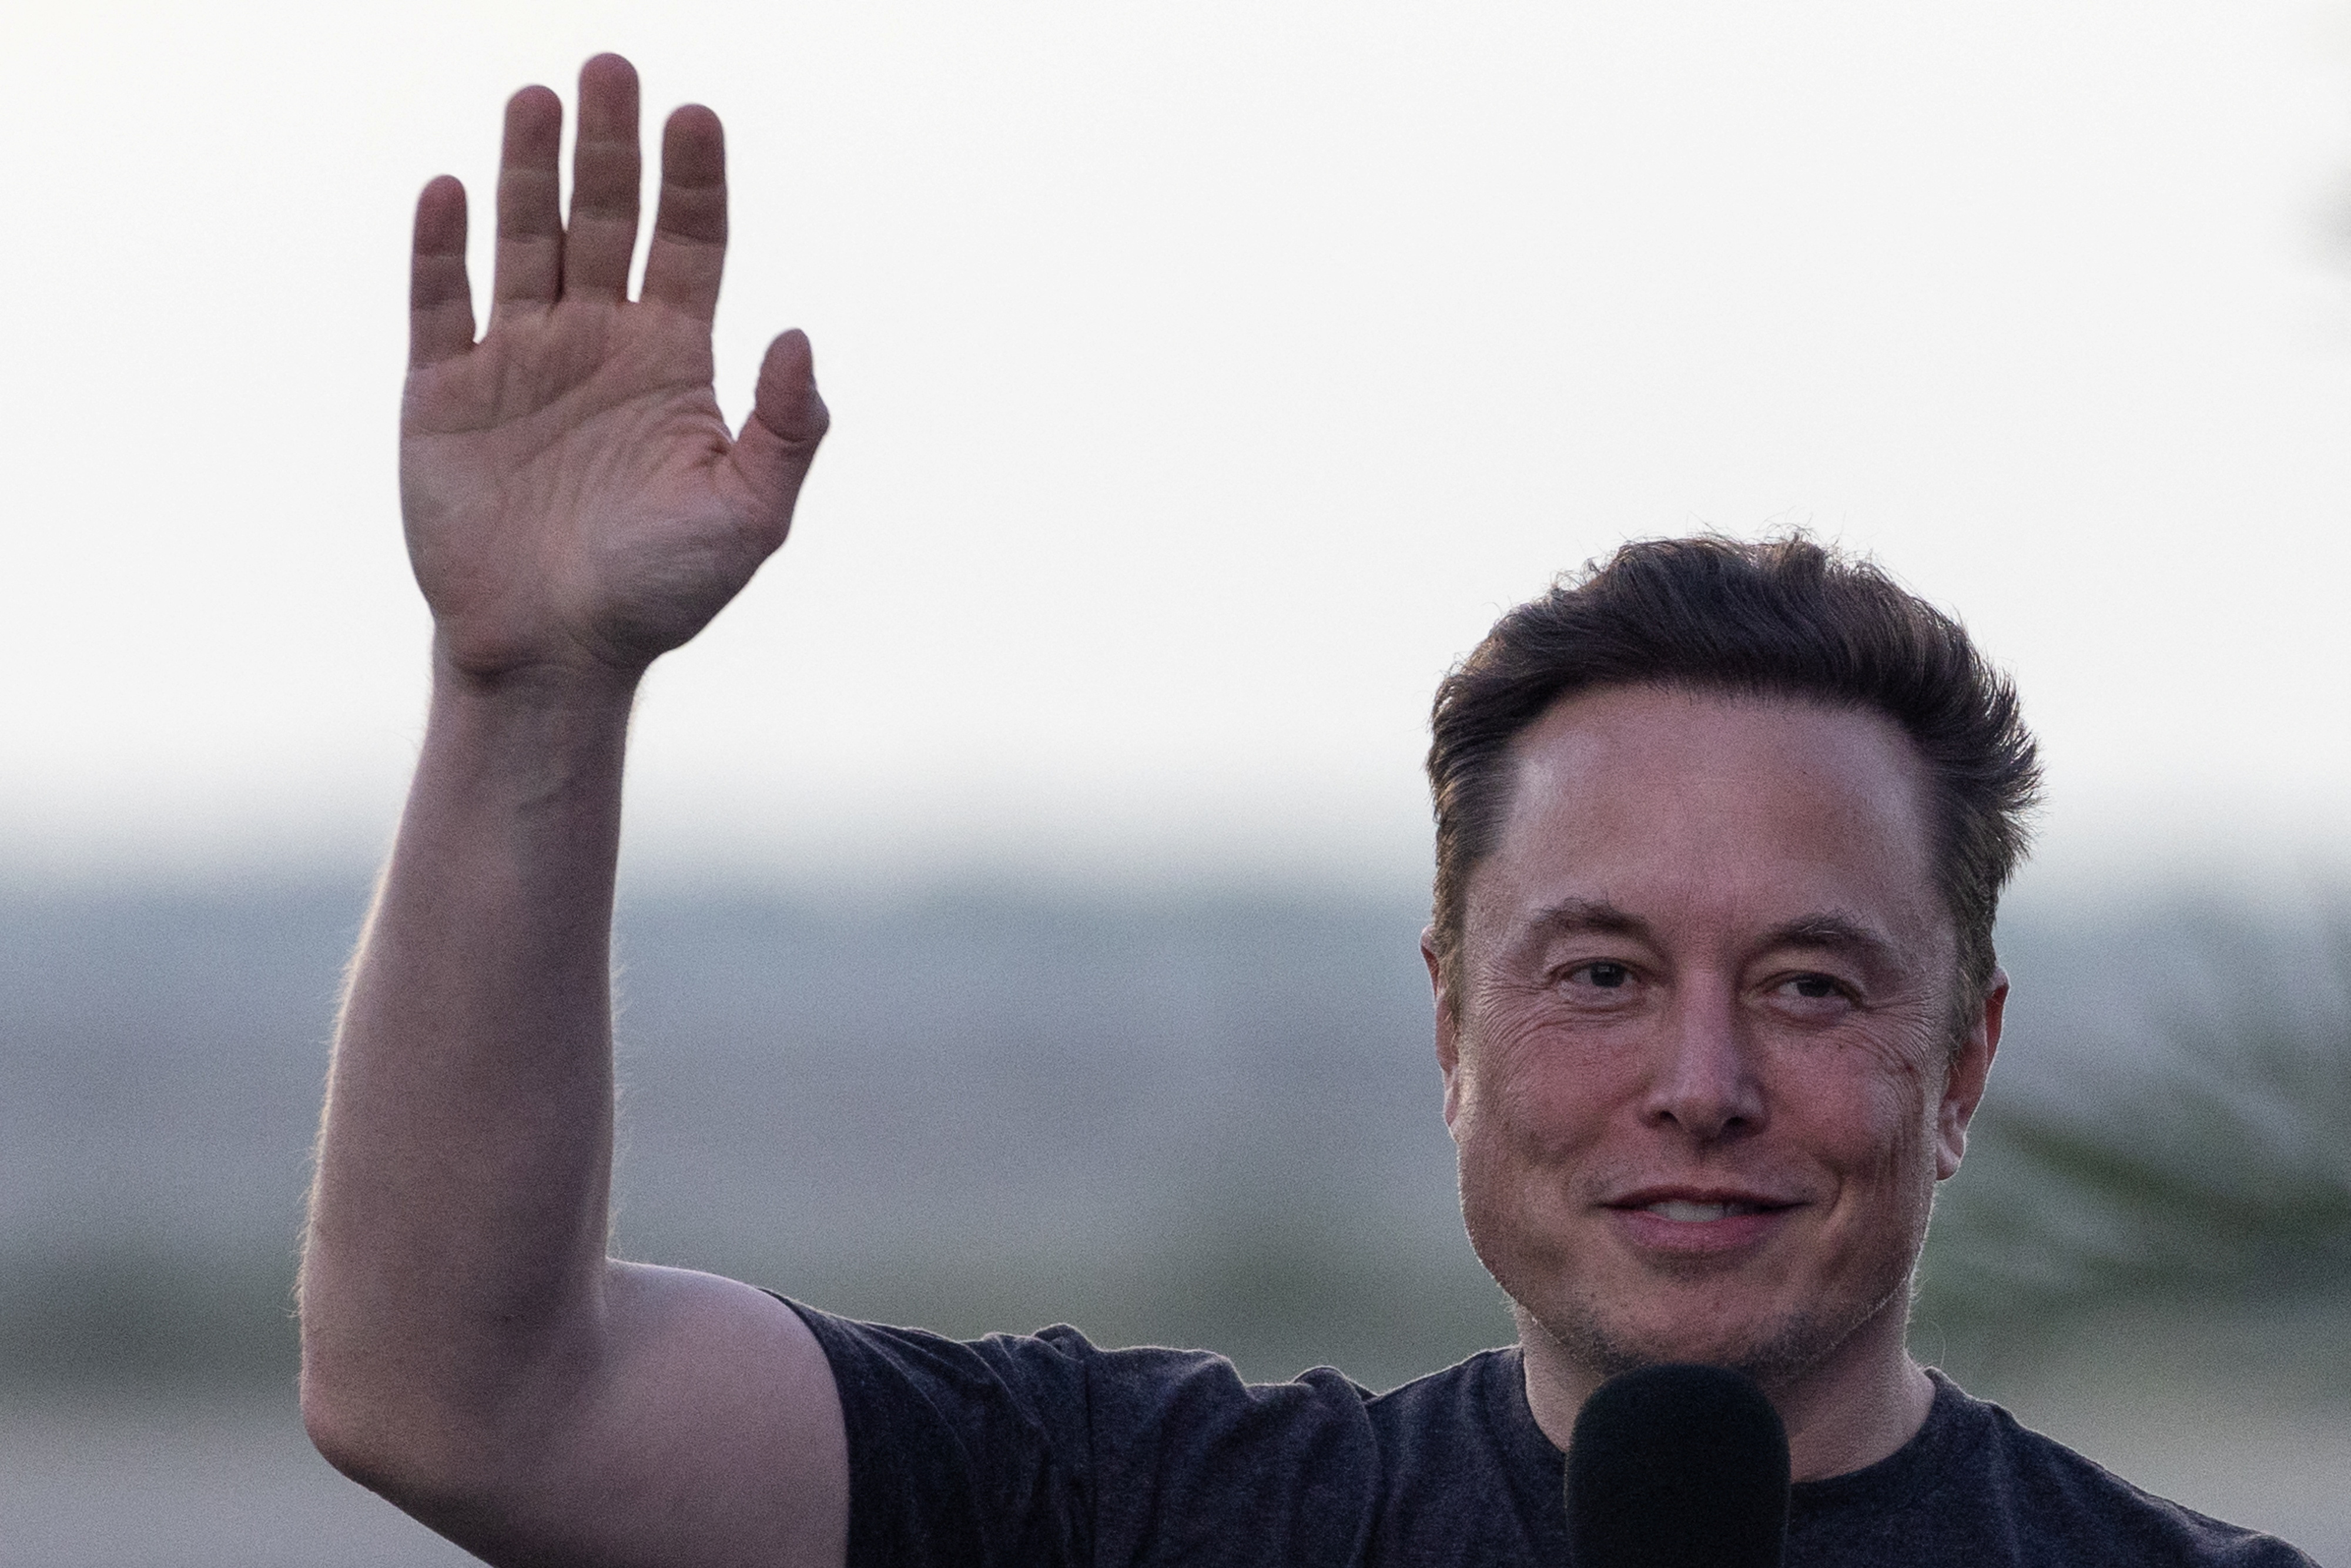 Musk waves during news conference at SpaceX Starbase in Brownsville, Texas